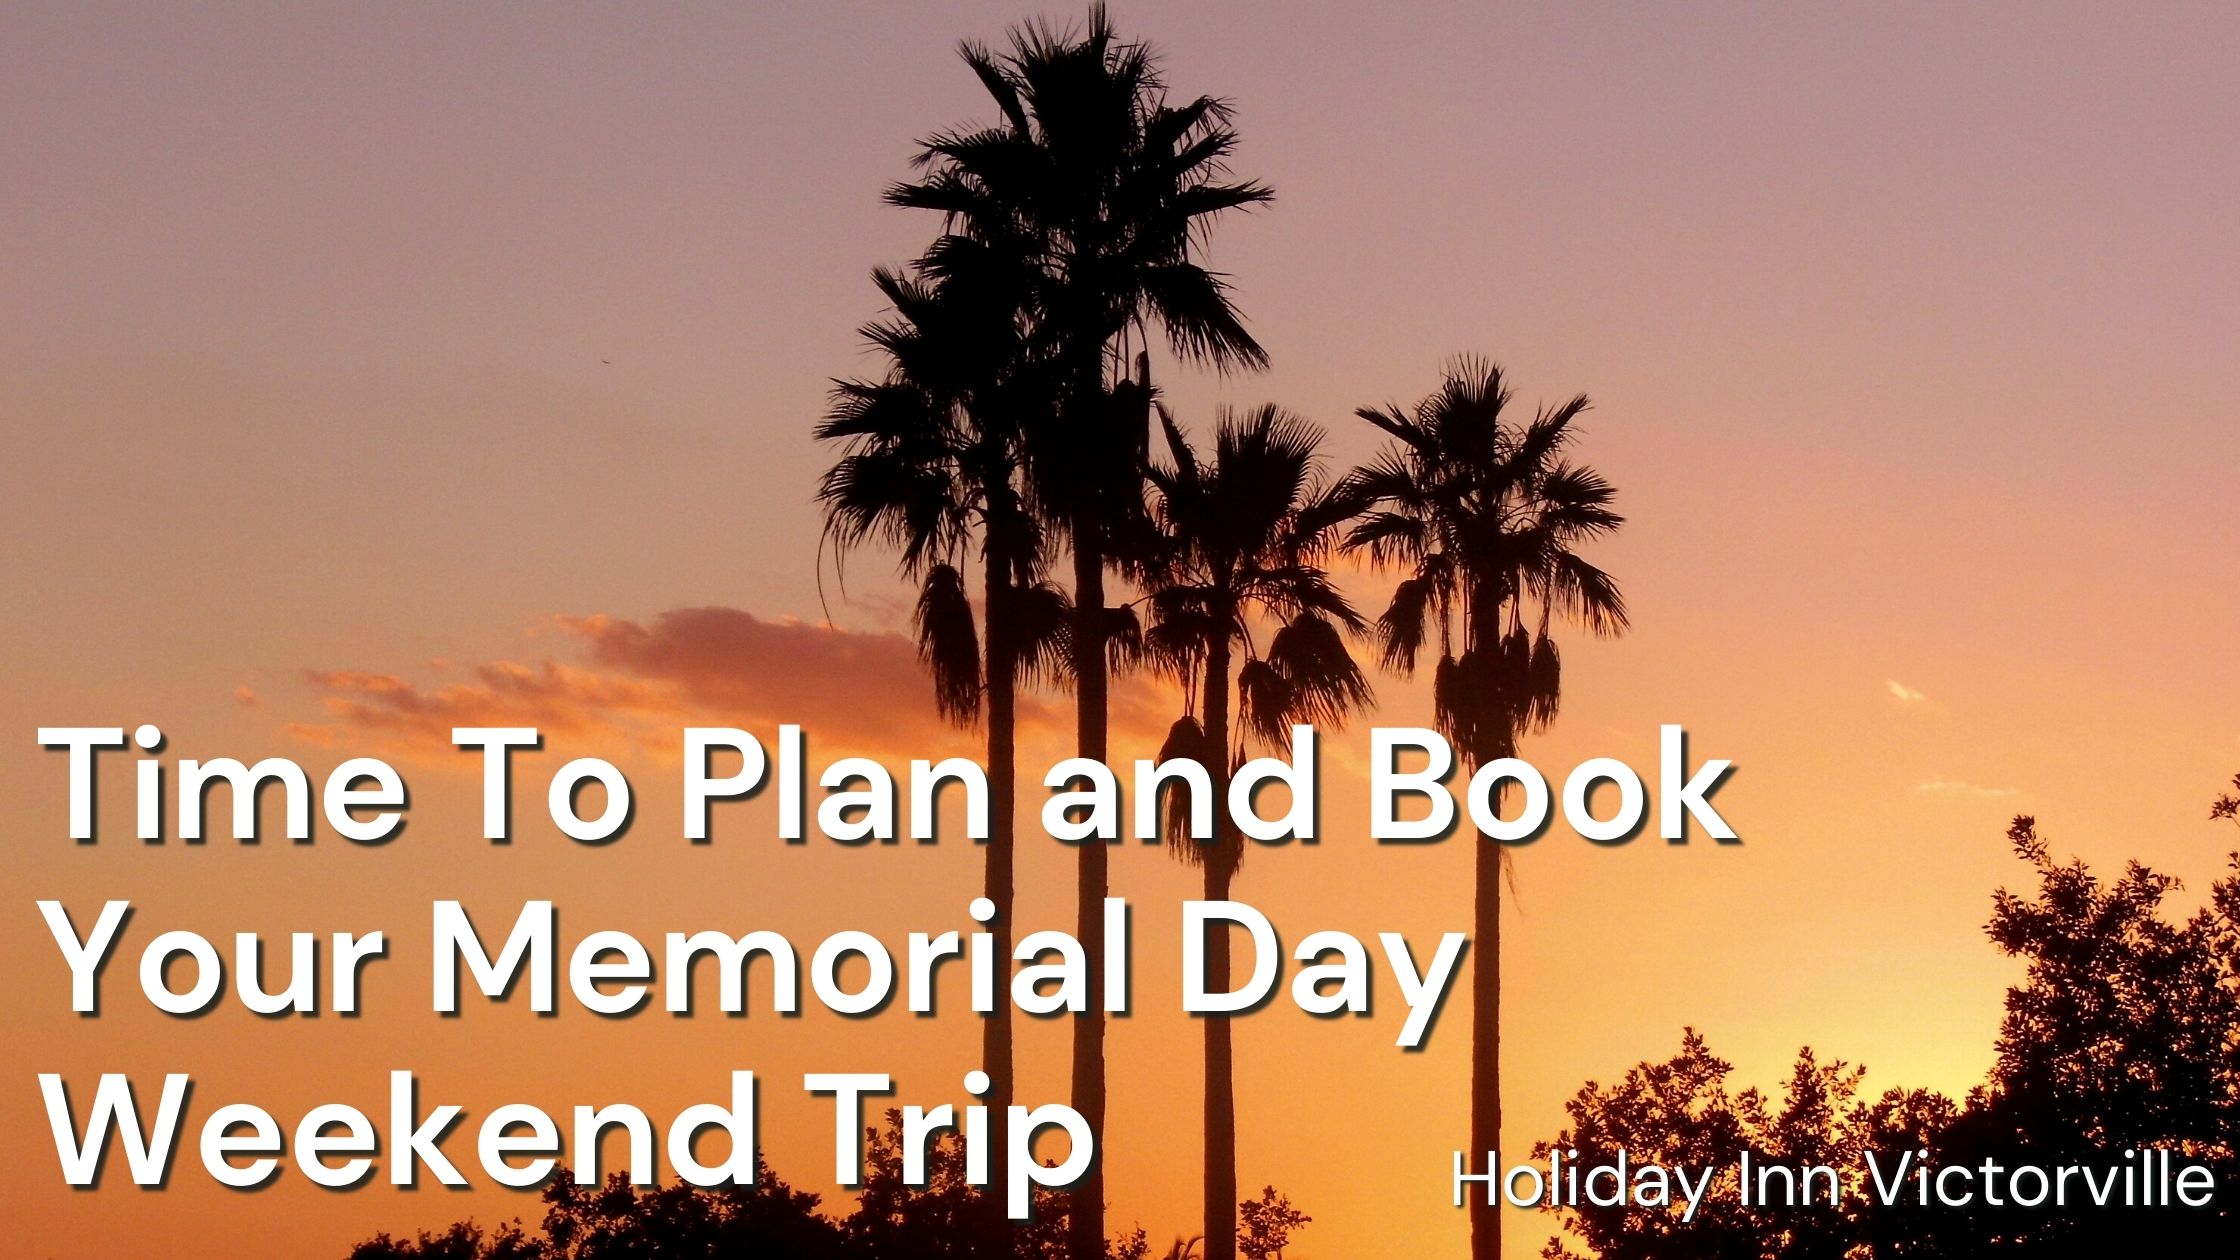 Time To Plan and Book Your Memorial Day Weekend Trip